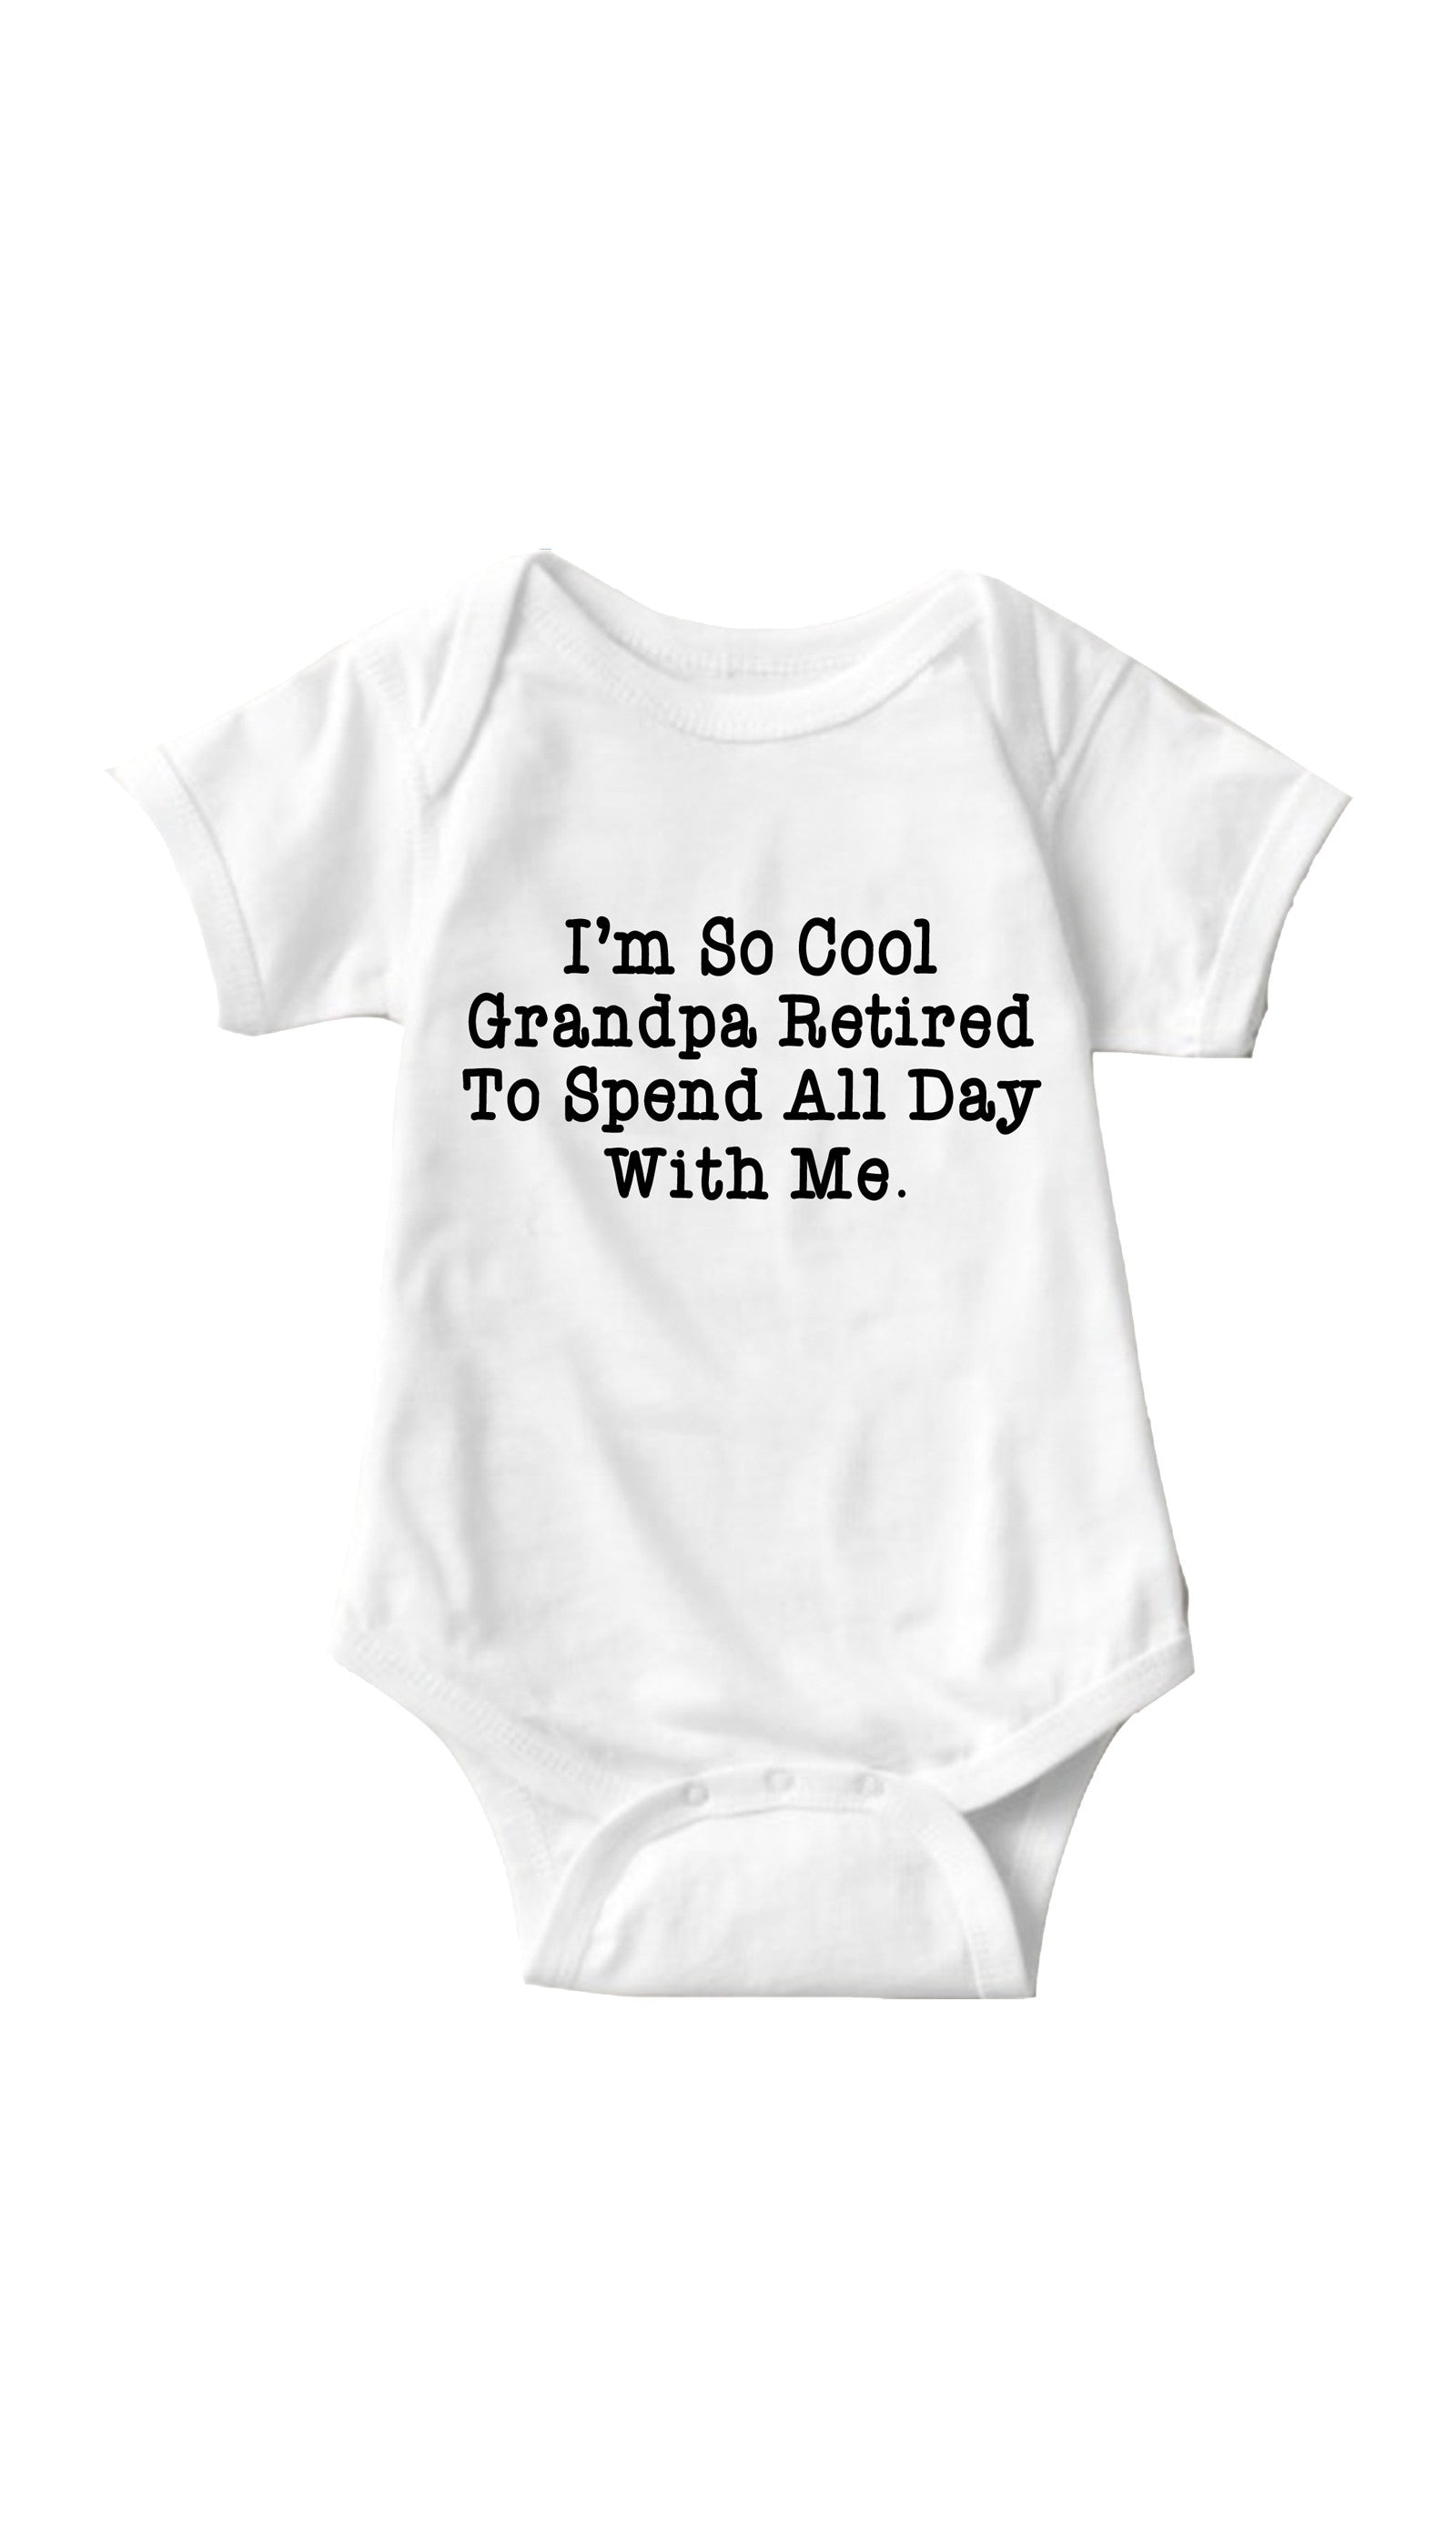 It's 5 AM Somewhere Funny Baby Onesie – Dad and Lads